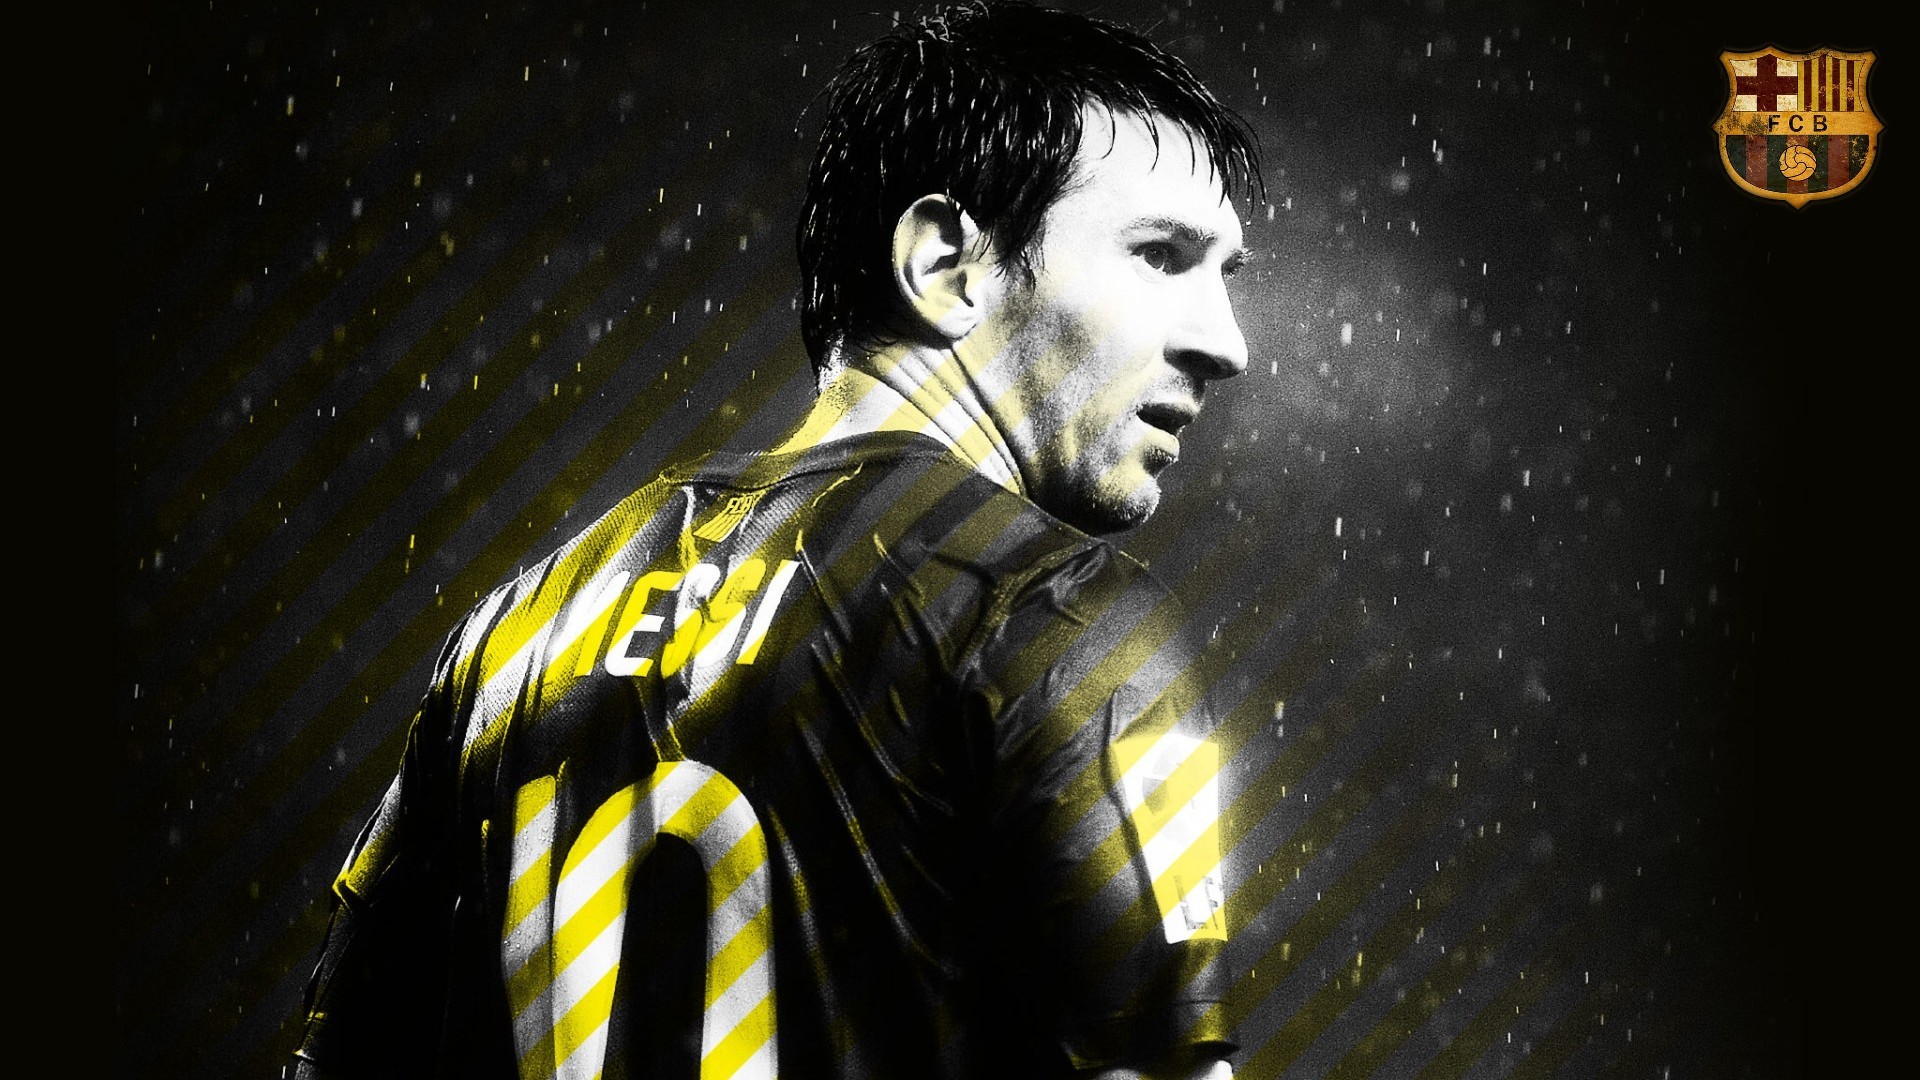 Messi Backgrounds HD With Resolution 1920X1080 pixel. You can make this wallpaper for your Mac or Windows Desktop Background, iPhone, Android or Tablet and another Smartphone device for free